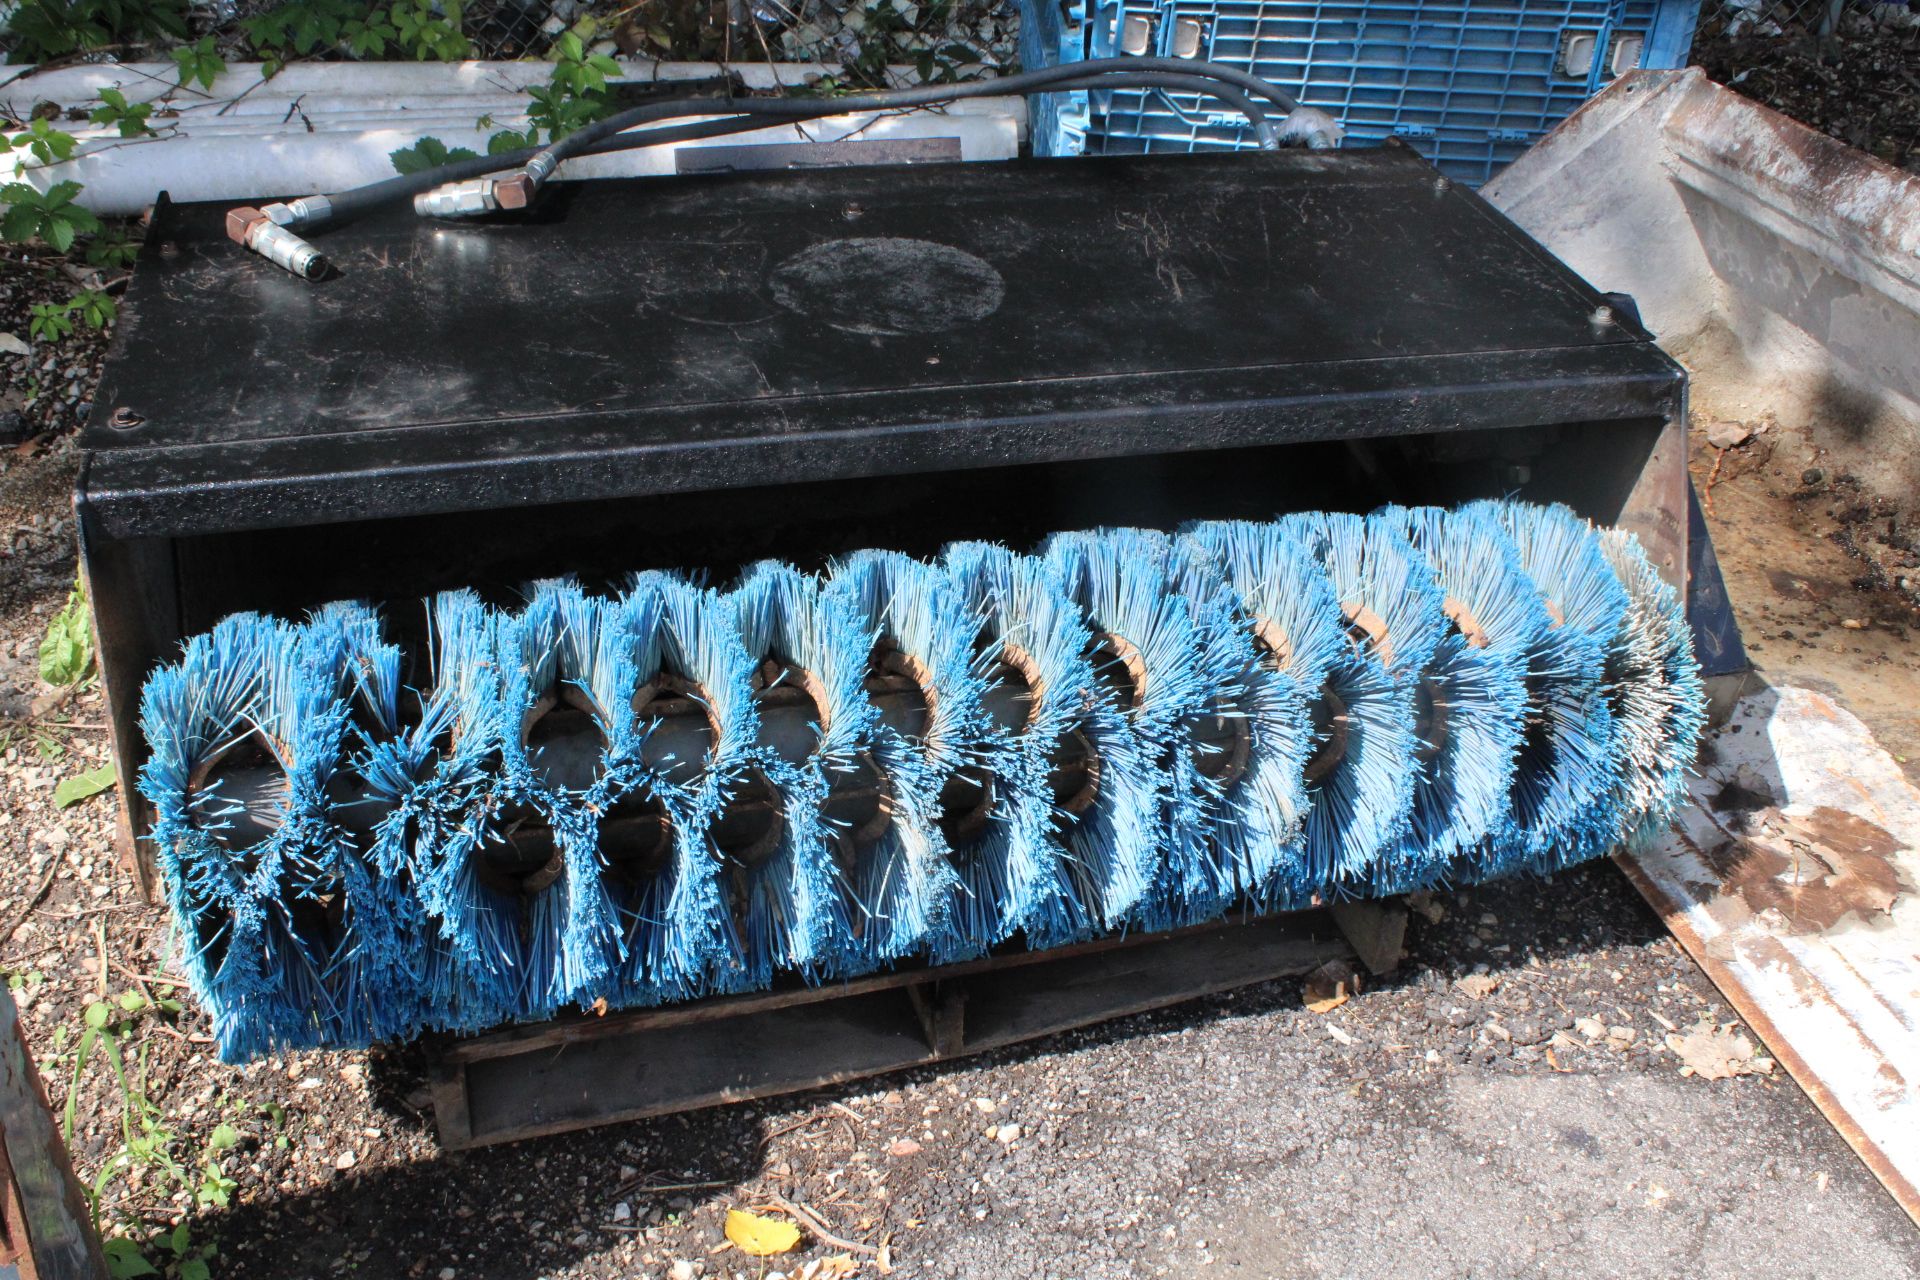 SKID STEER SWEEPER ATTACHMENT